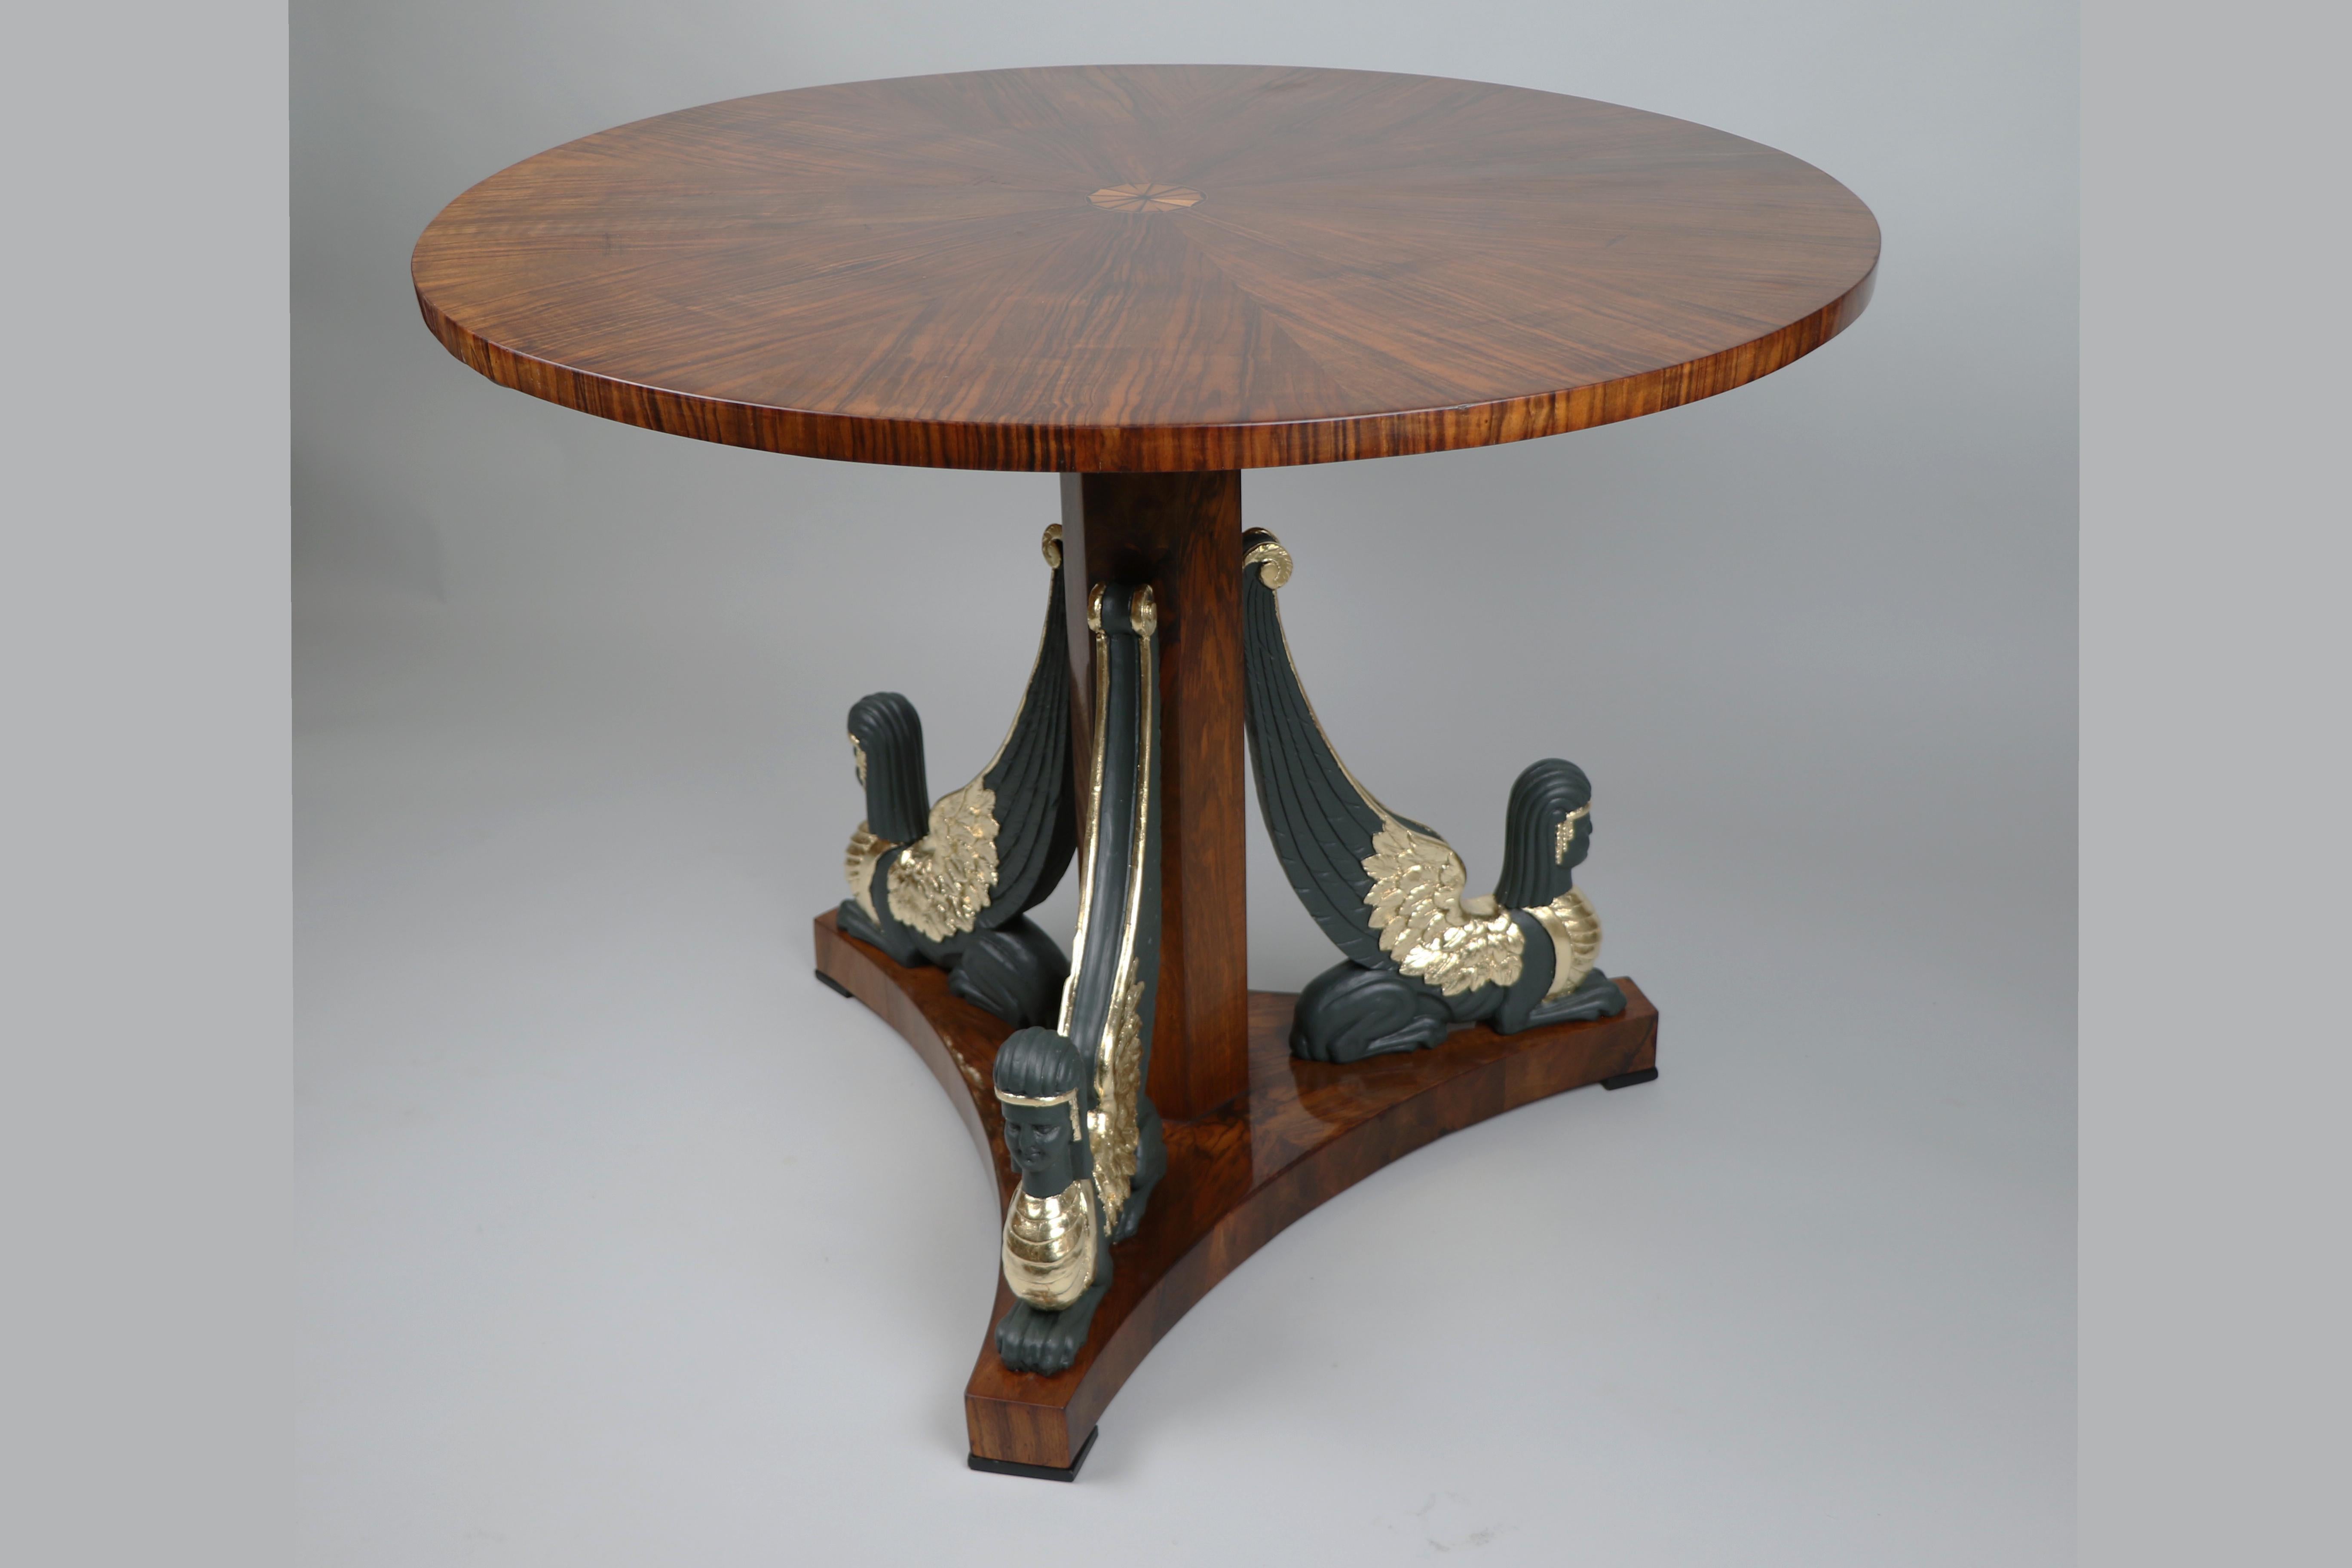 
Hello,
This stunning Biedermeier walnut pedestal table is the best example of top-quality Viennese piece from circa 1820. The table is a gorgeous example of early Biedermeier with Empire style influences.

Viennese Biedermeier is distinguished by